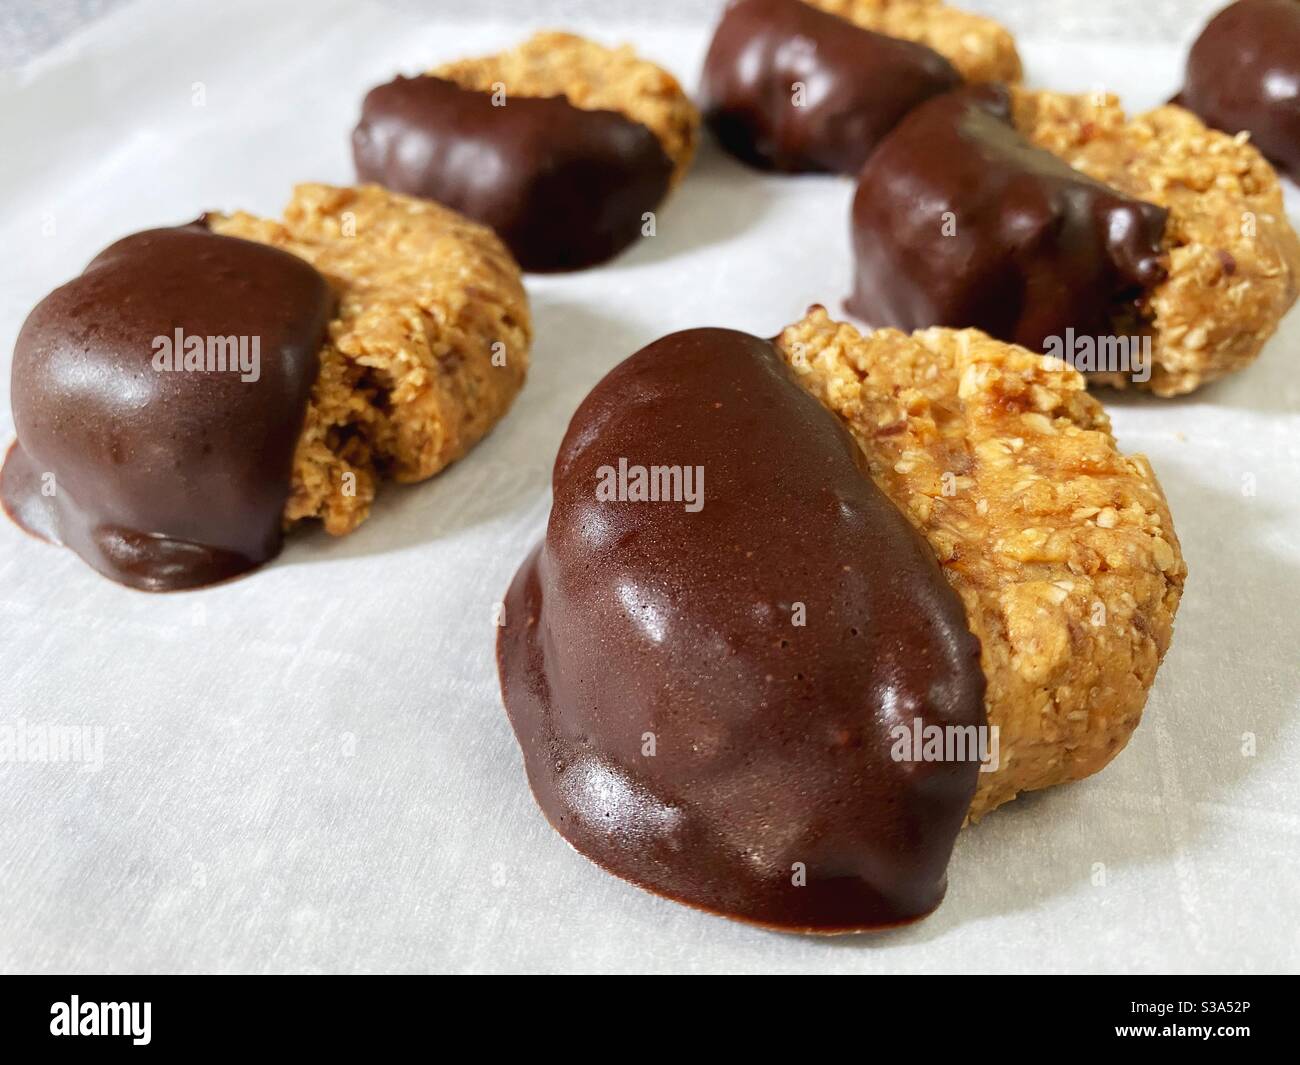 Vegan, no refined sugar, no bake peanut butter cookies dipped in chocolate. Stock Photo